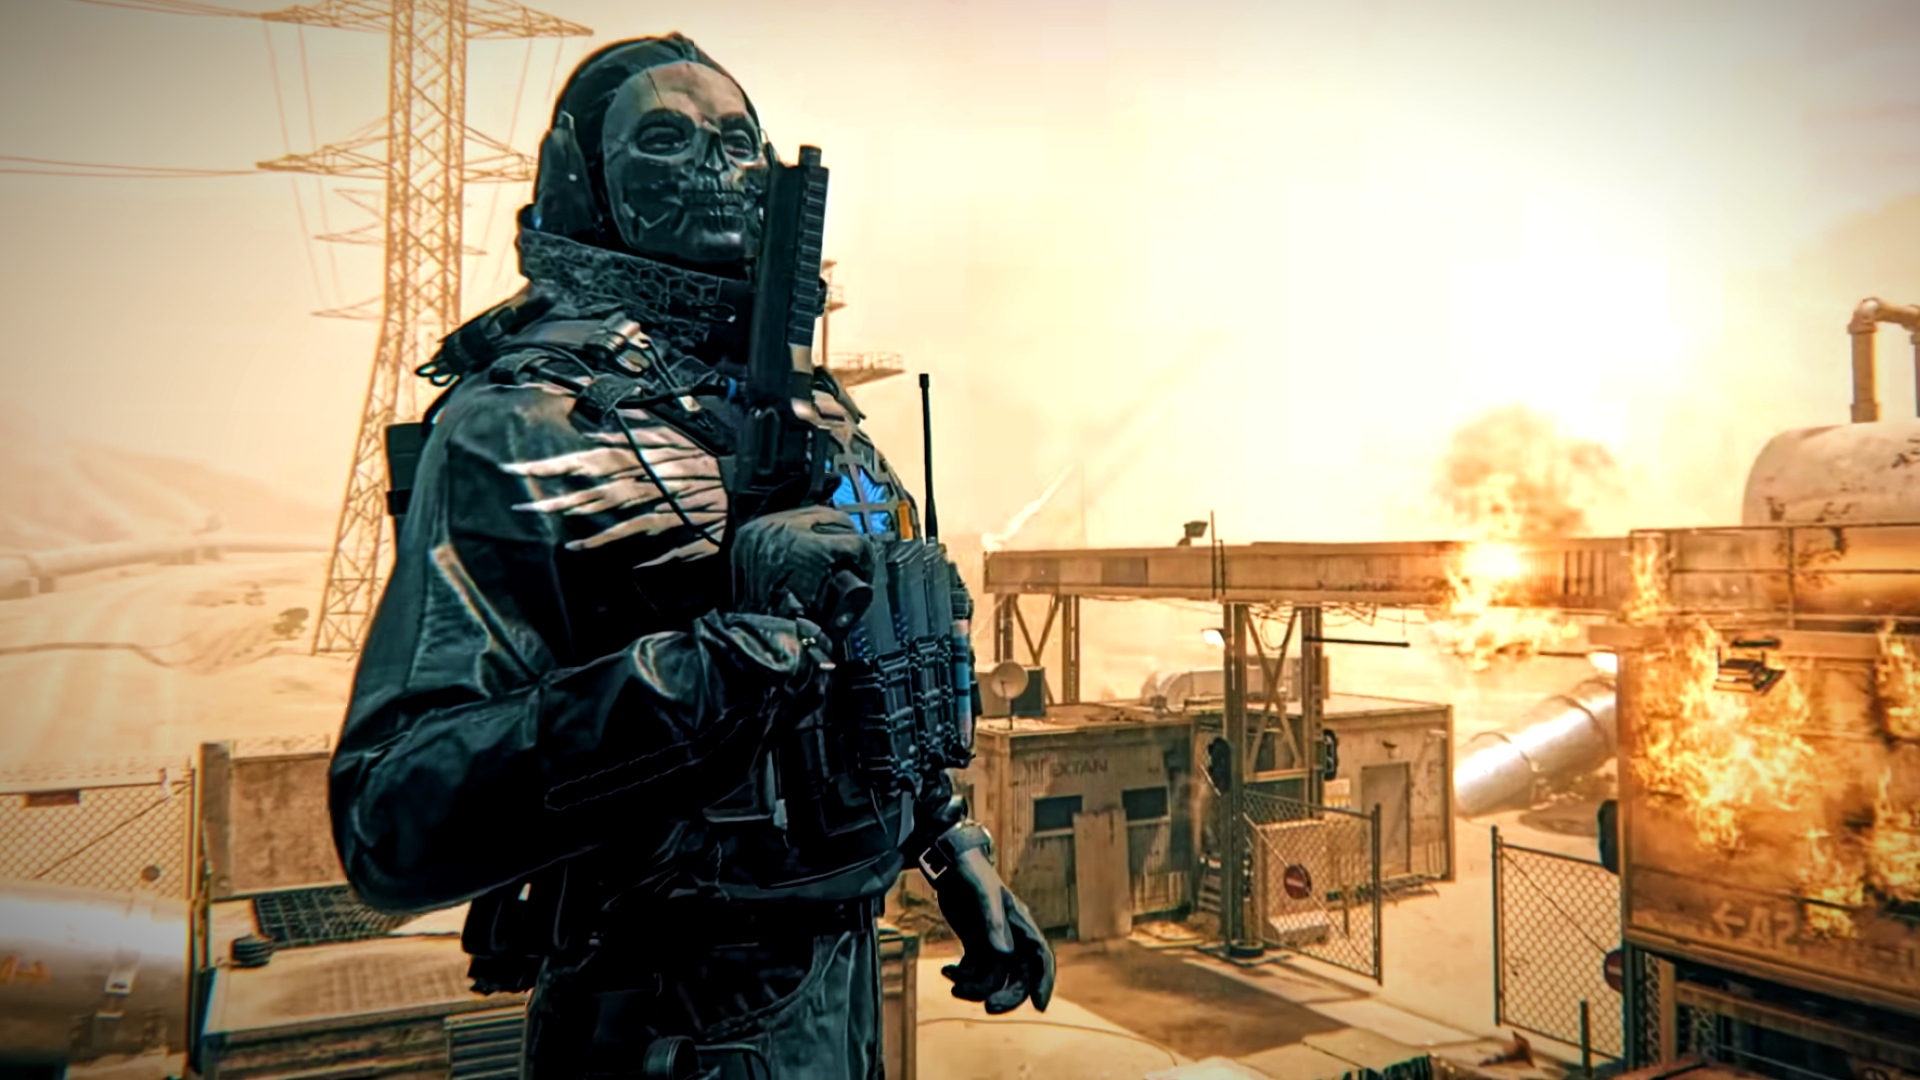 Modern Warfare 3 trailer reveals the return of the series' most